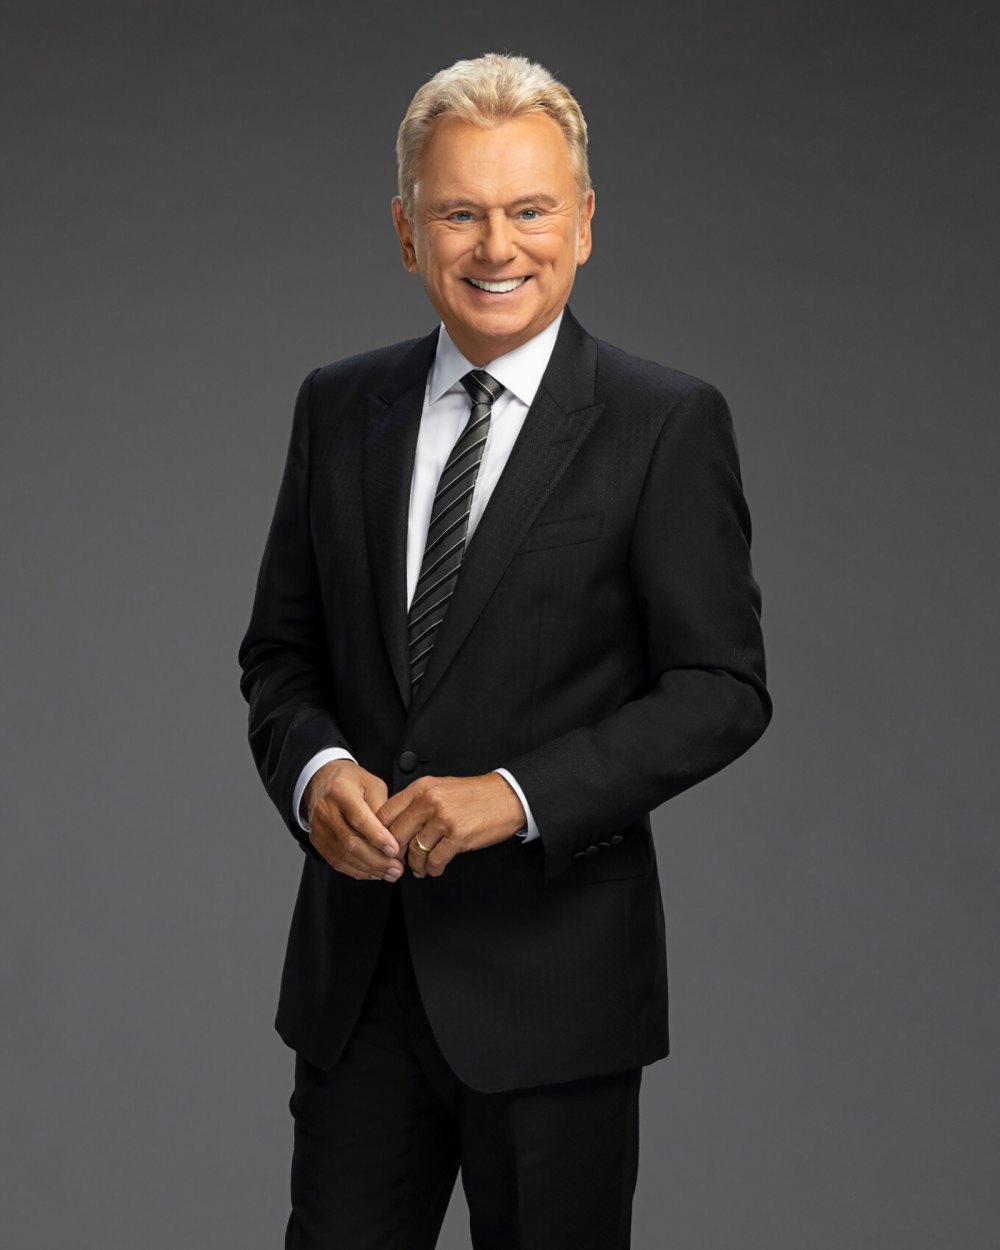 Pat Sajak’s Final ‘Wheel of Fortune’ Show Date Revealed Ahead of Retirement